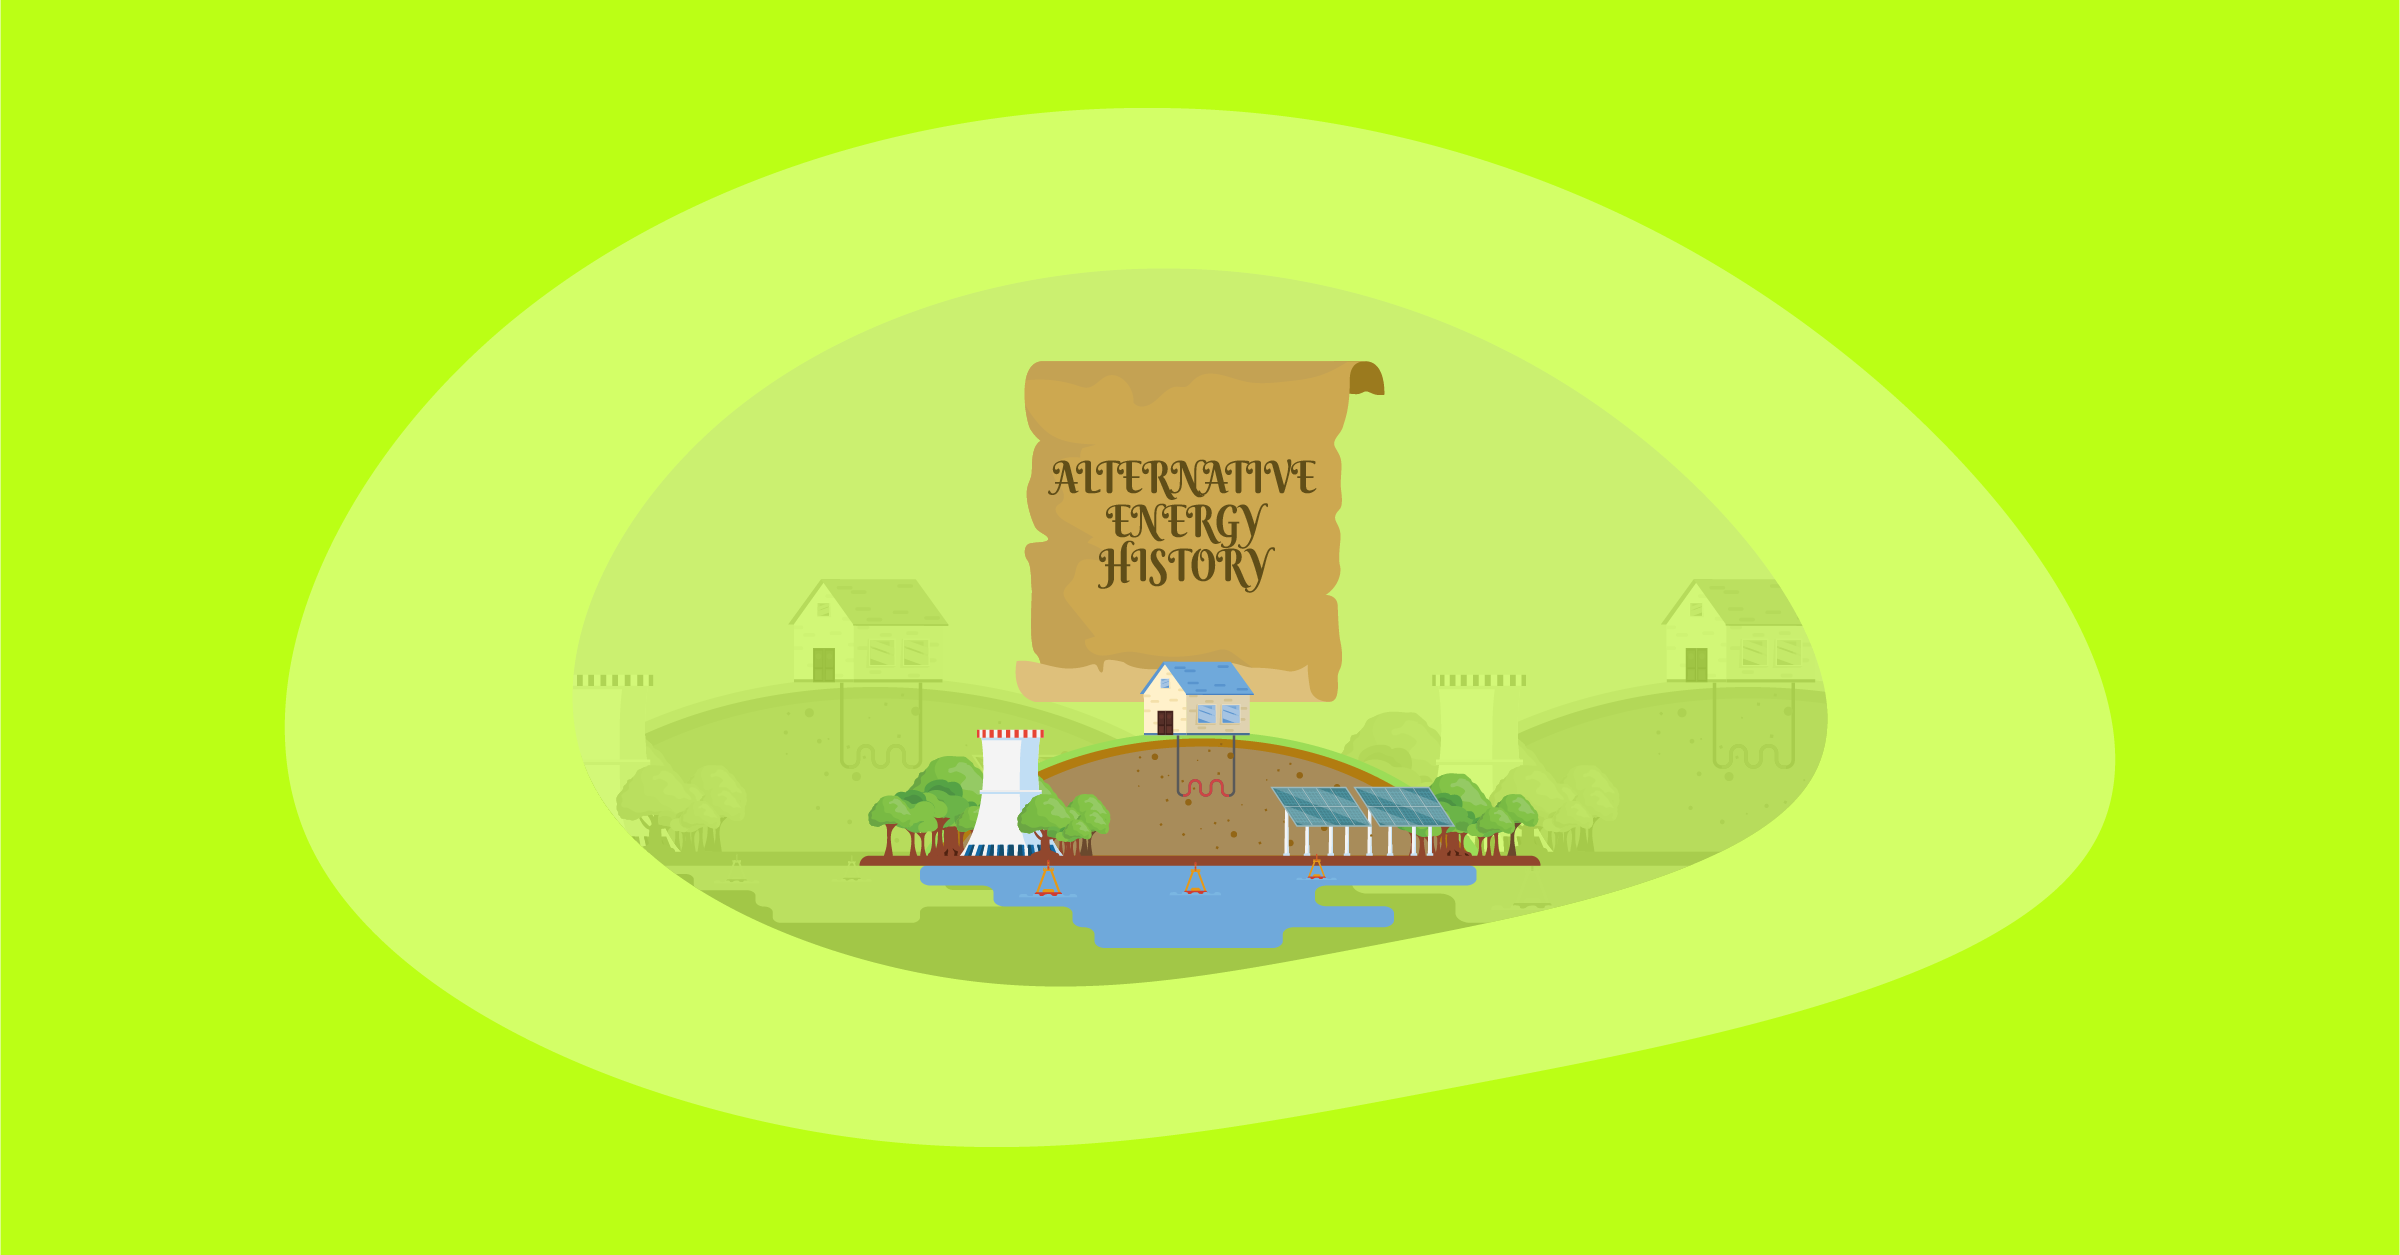 Illustration of Alternative Energy and its history